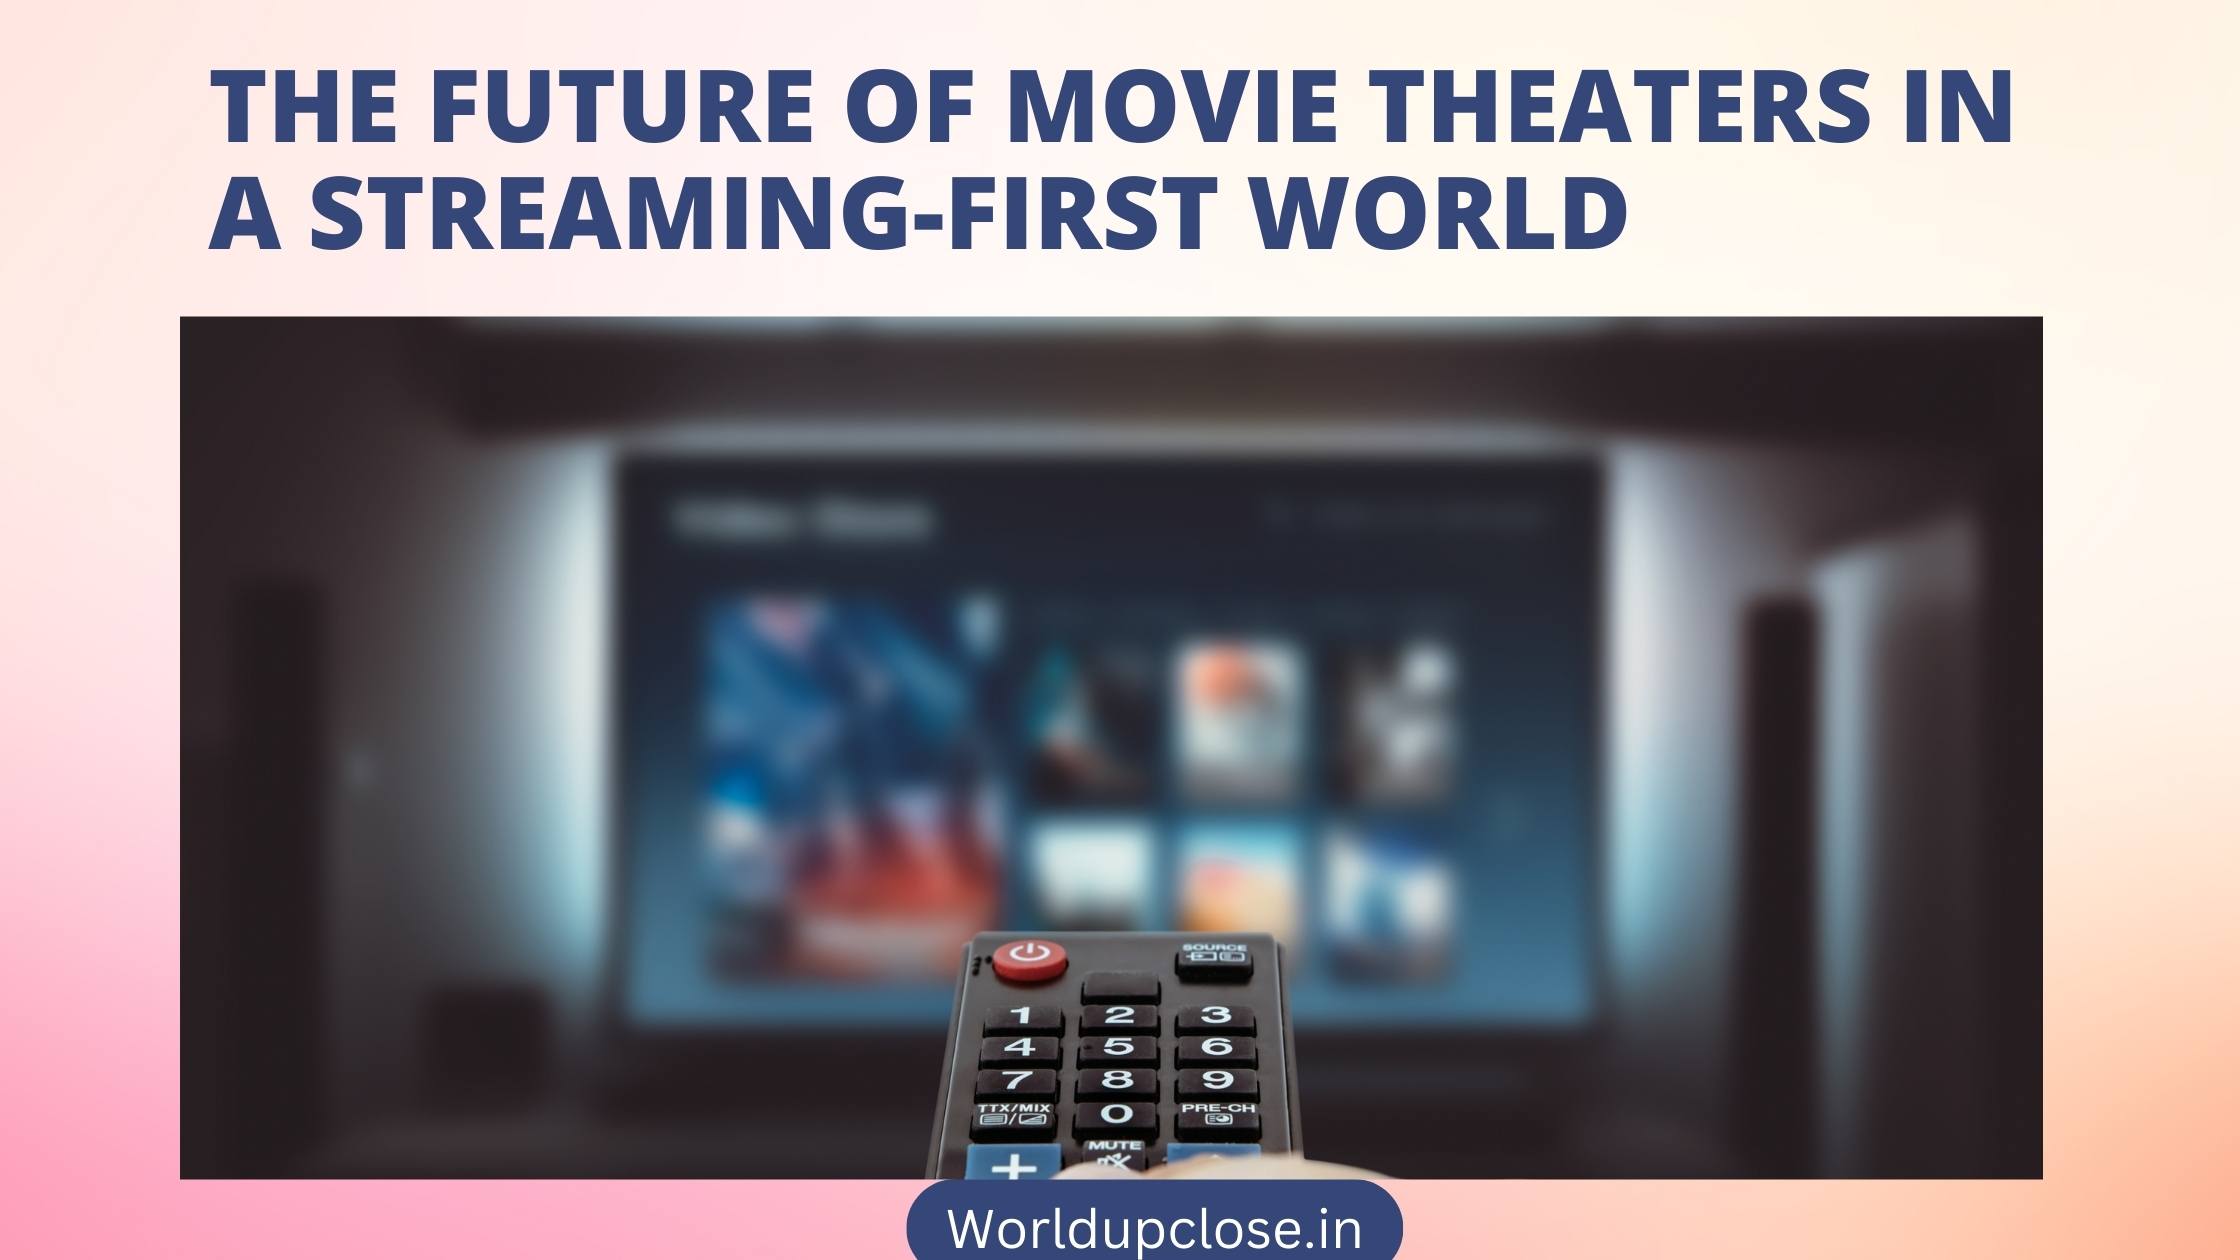 The Future of Movie Theatres in a Streaming-First World 20